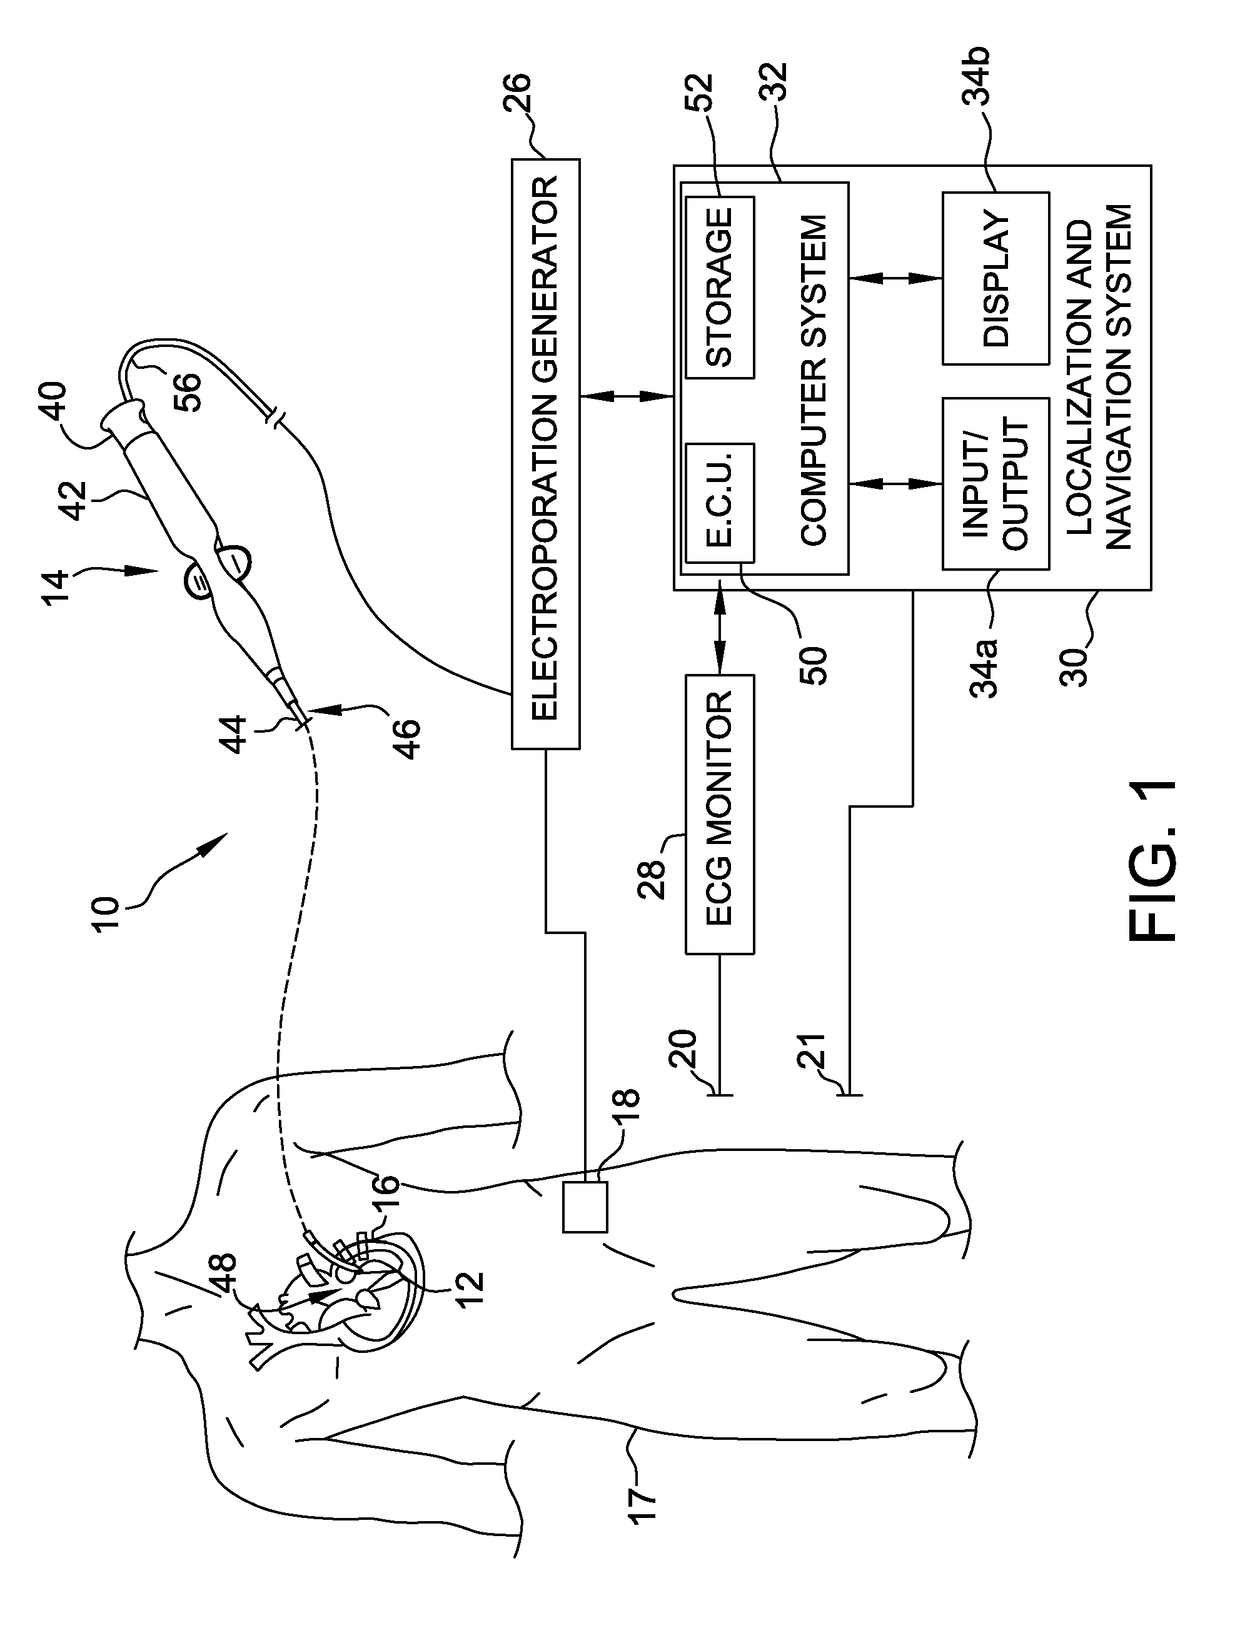 Electroporation system and method of preconditioning tissue for electroporation therapy